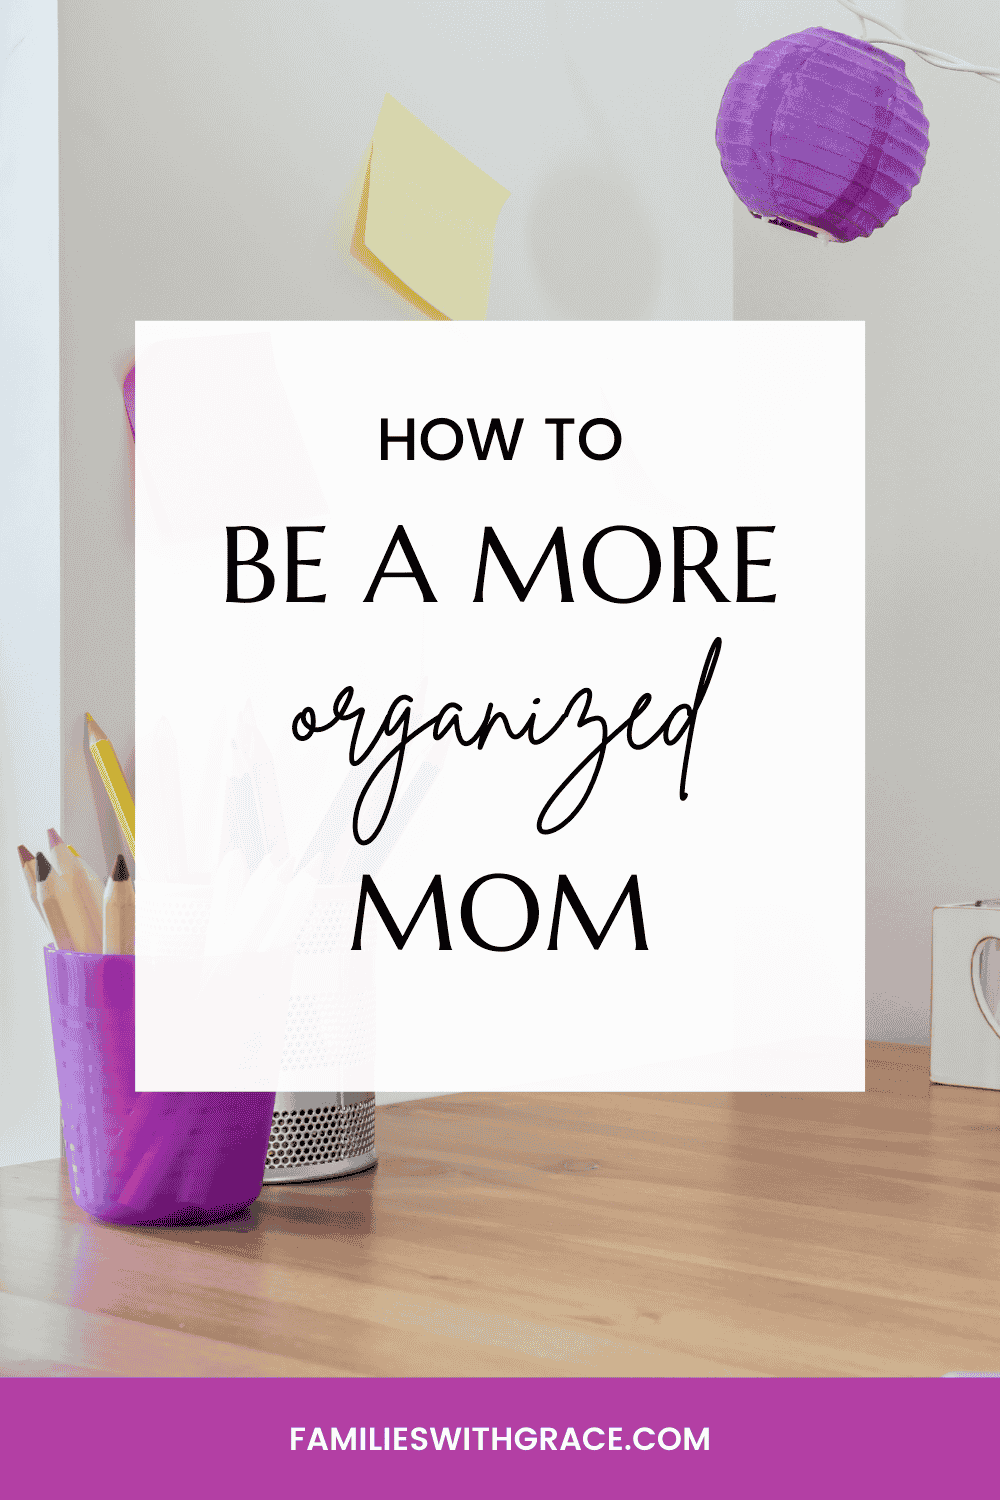 How to be an organized mom -- part 2